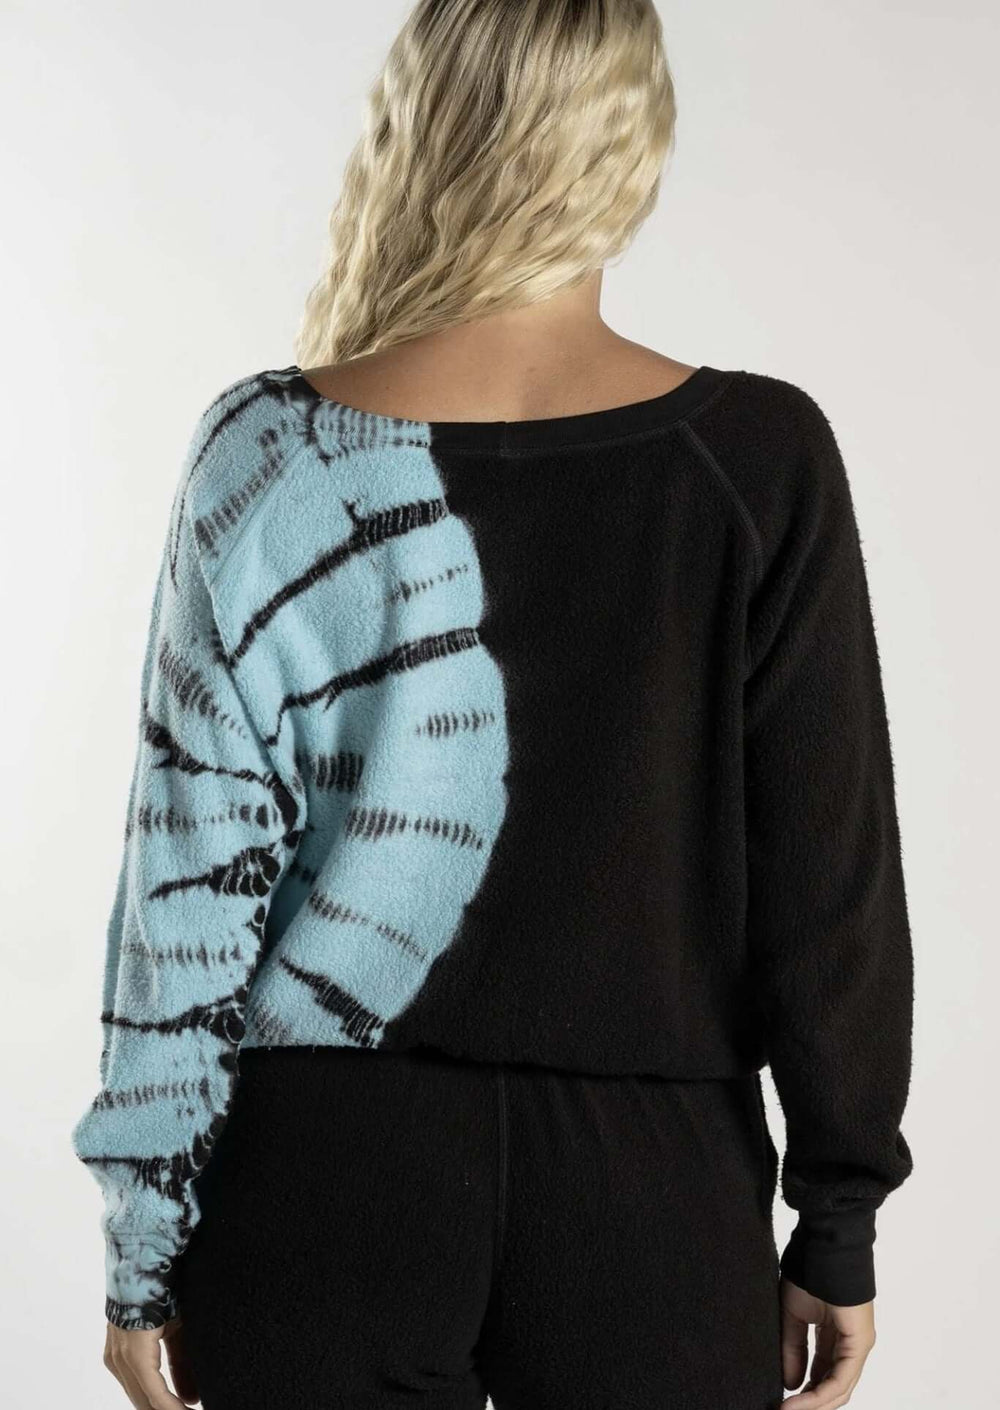 Jala Black Sea Tie Dye Chill Pullover eco-friendly, ultra soft French terry sponge fleece -Style CH7501F | Made in the USA | Classy Cozy Cool Boutique